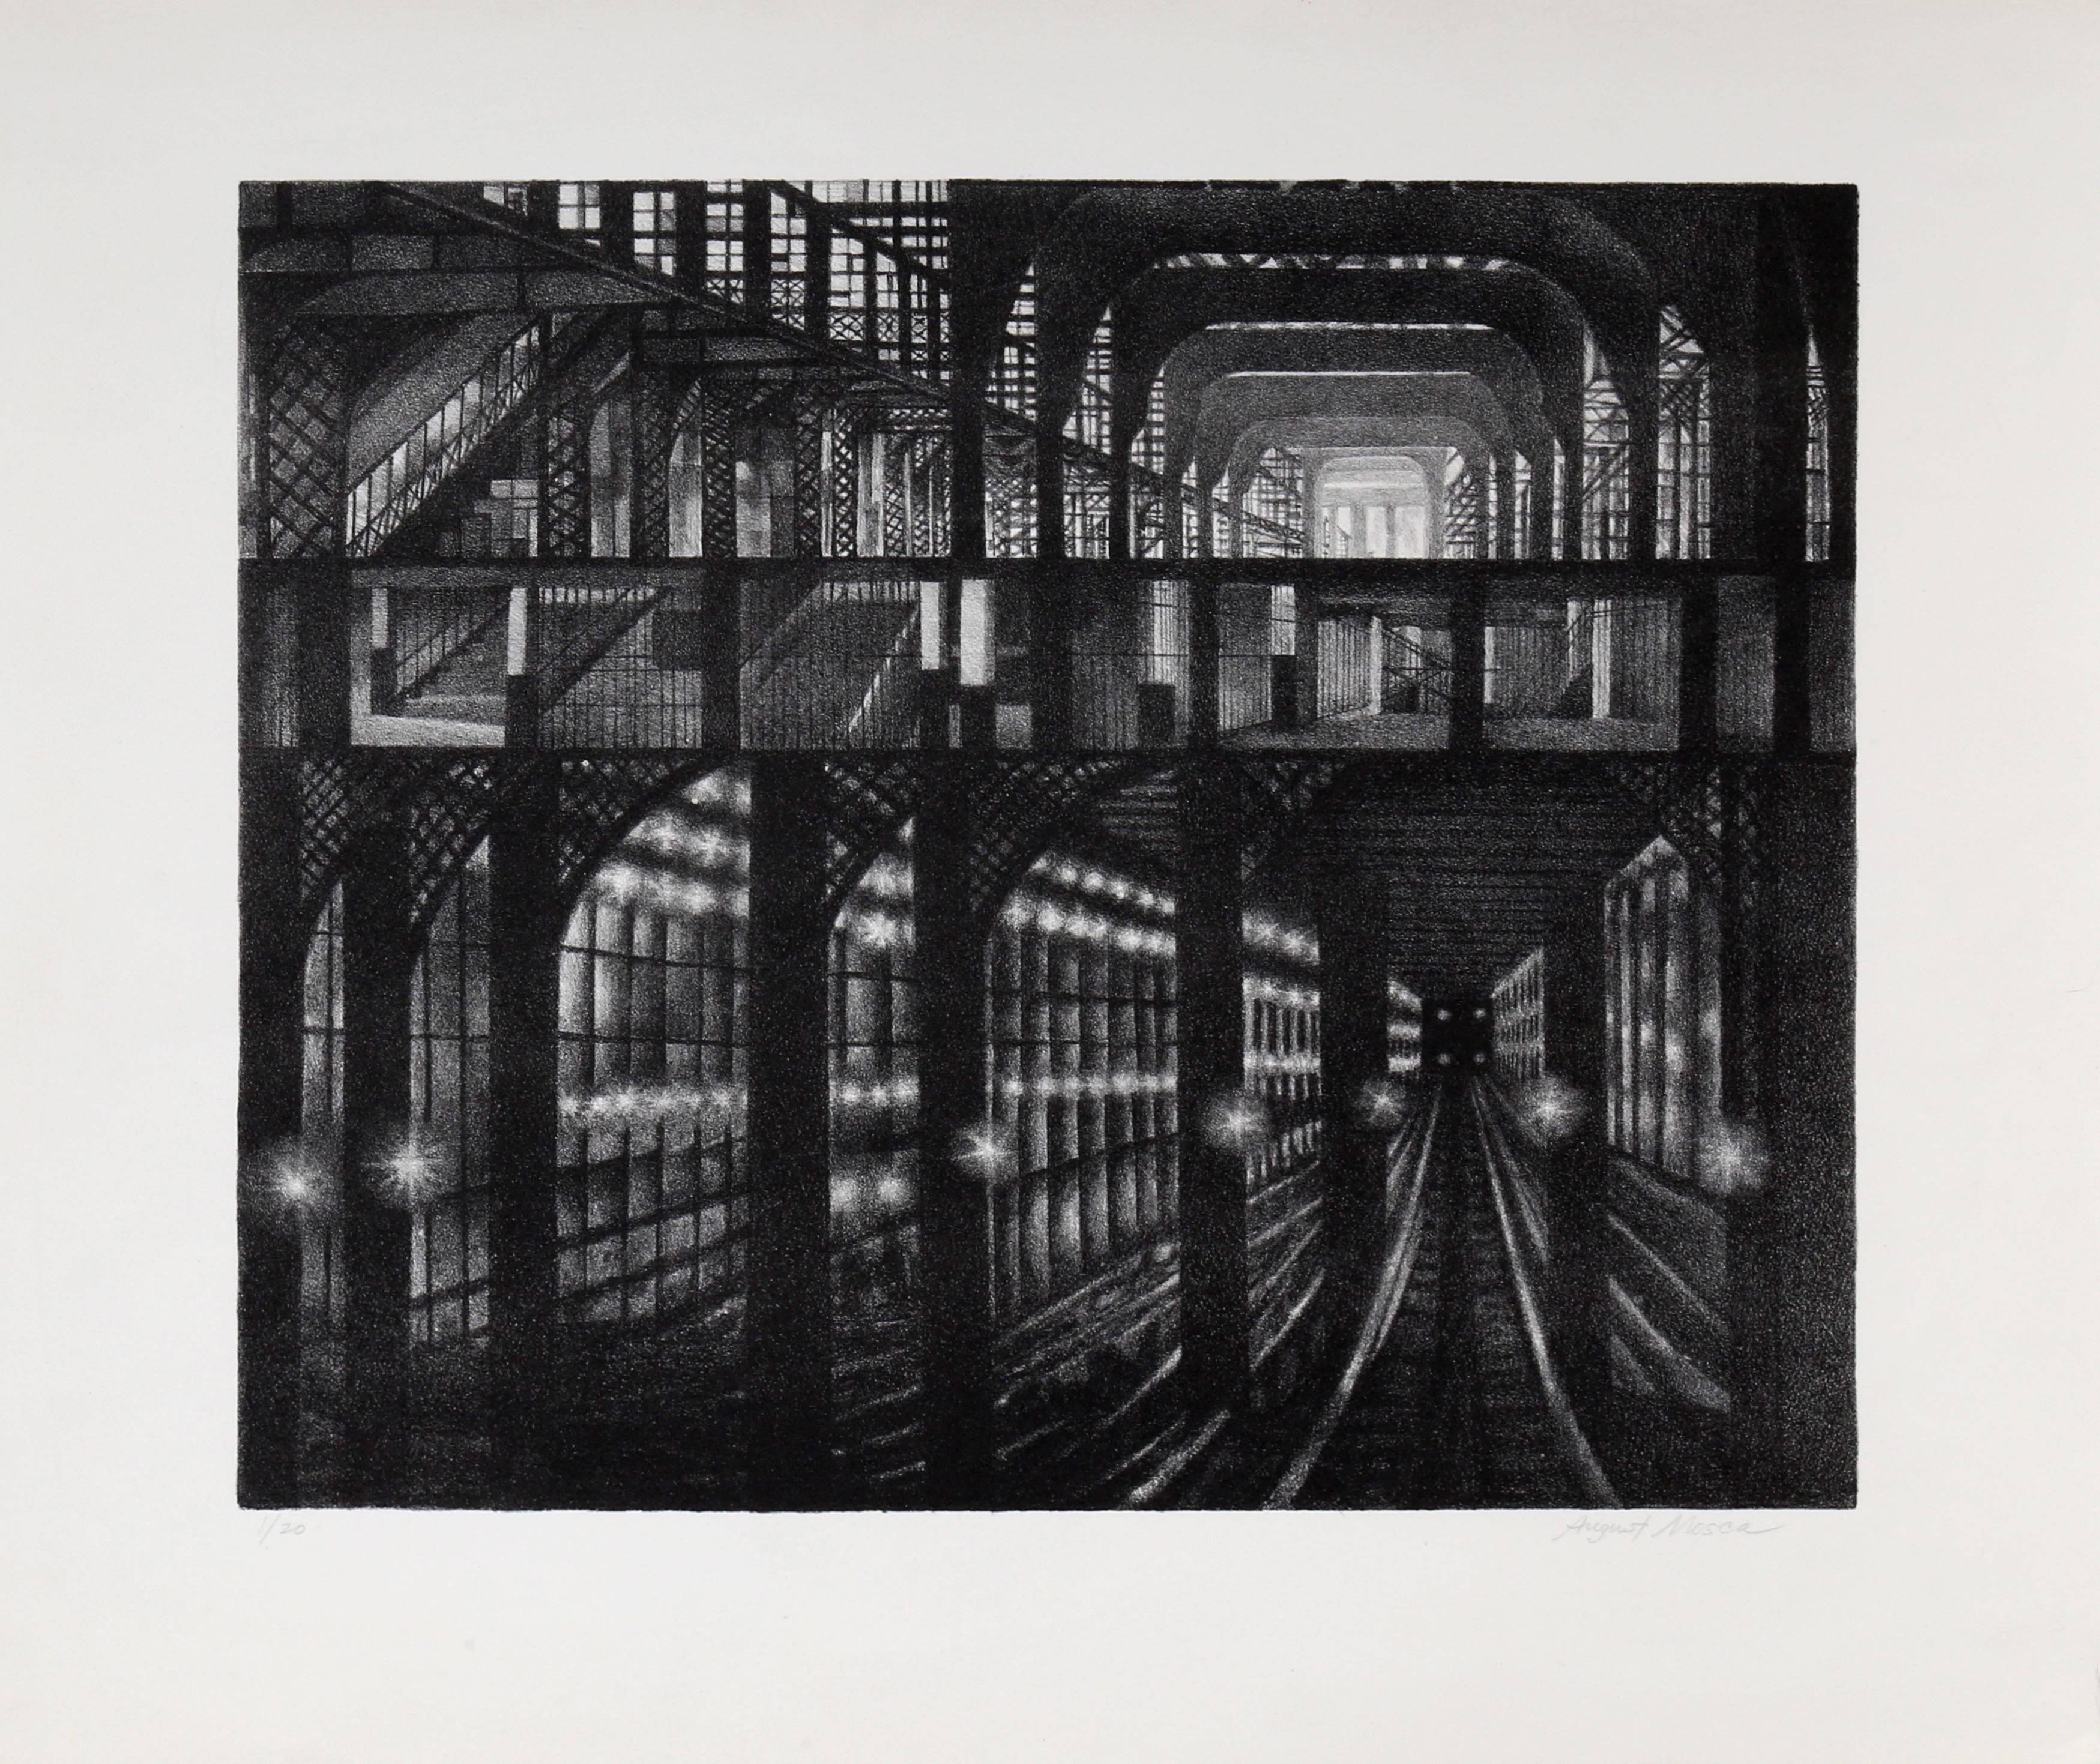 Subway Station, Architectural Etching by August Mosca